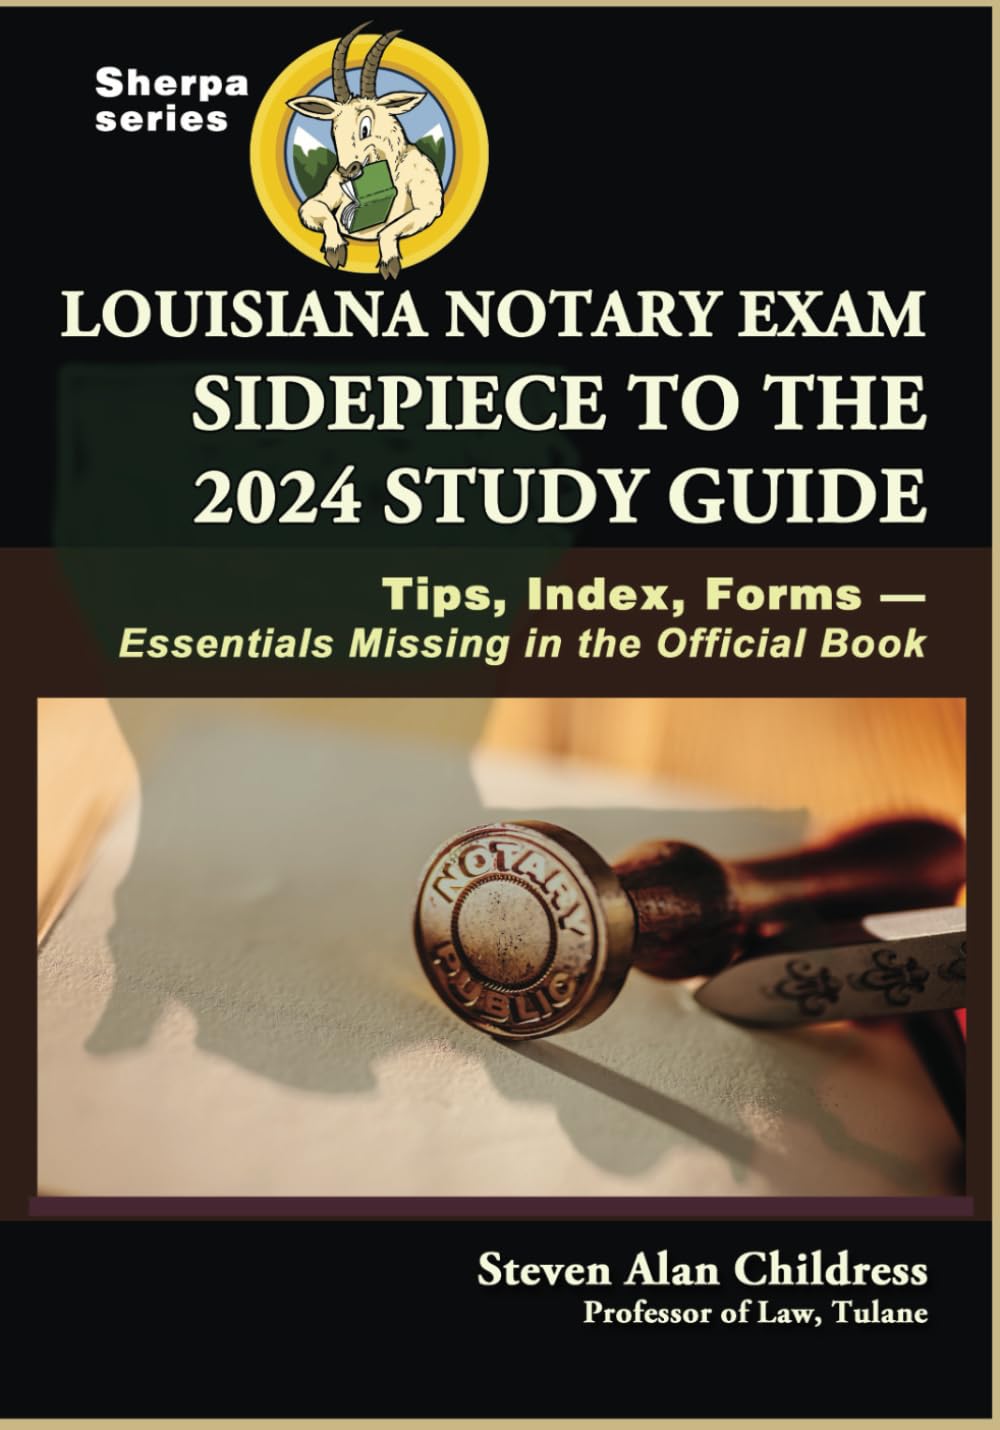 Louisiana Notary Exam Sidepiece to the 2024 Study Guide: Tips, Index, Forms—Essentials Missing in the Official Book